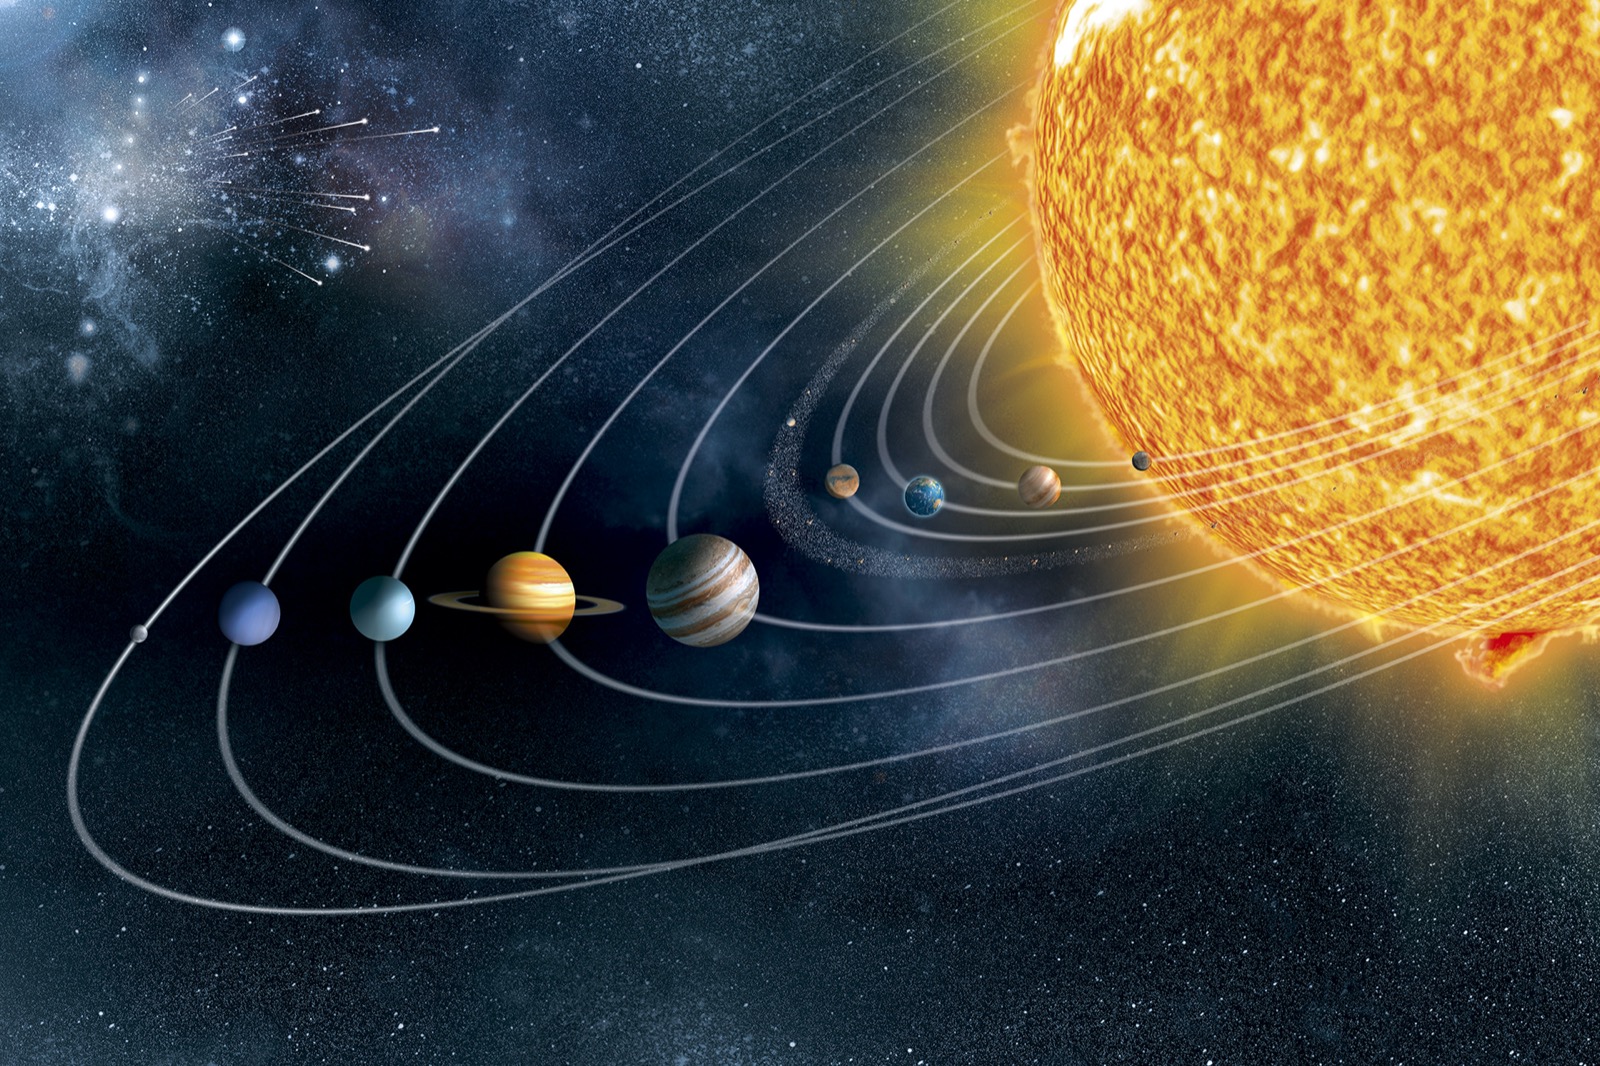 Prove You’re Actually Smart by Acing This General Knowledge Quiz Solar System, Artwork